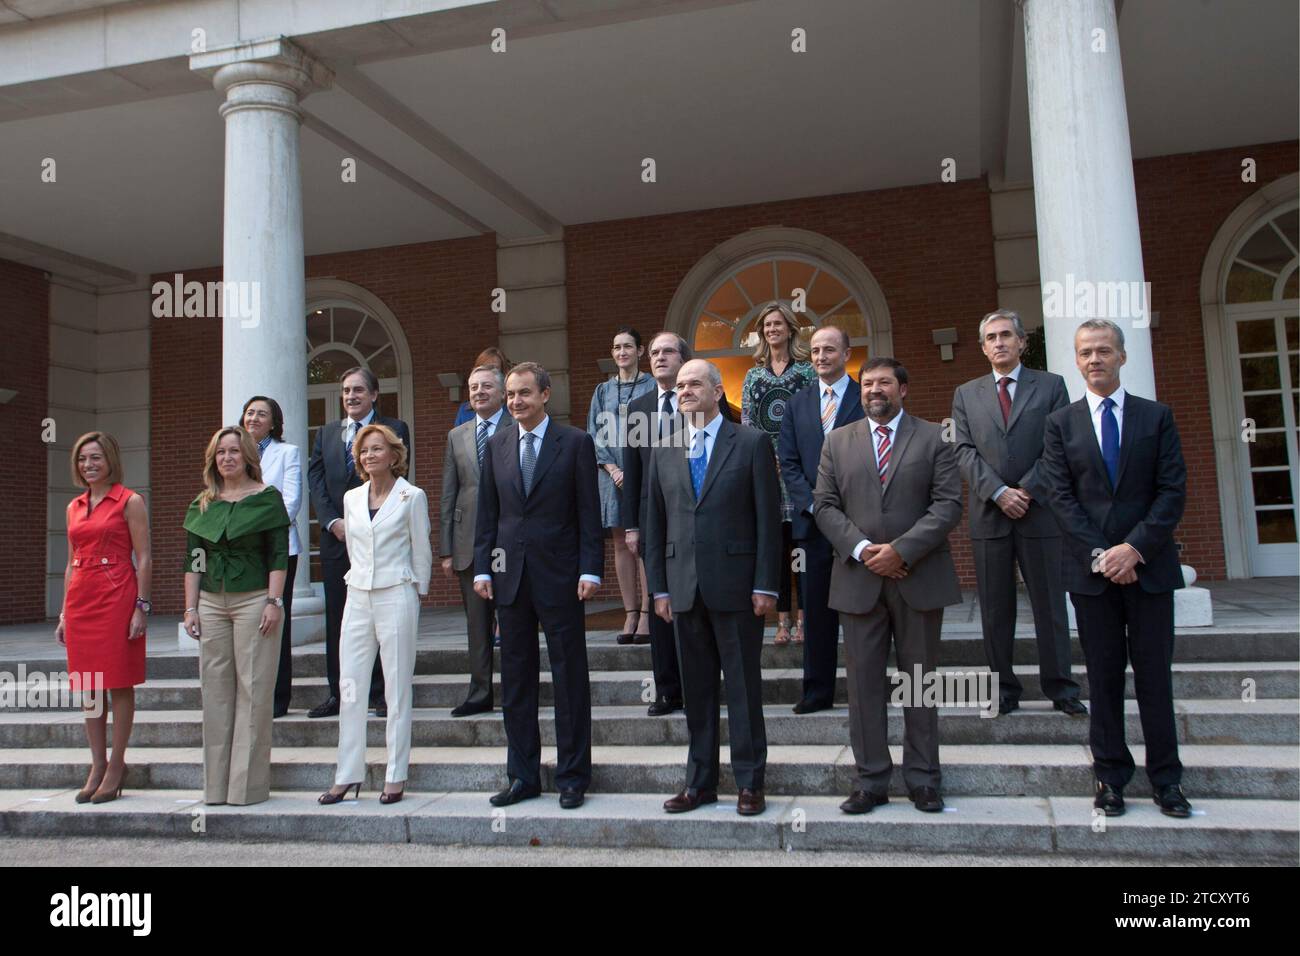 07/22/2011 Madrid, Moncloa Palace. Jose Luis Rodriguez Zapatero presents his new government after the departure of Rubalcaba Photo, Isabel Permuy ARCHDC. Credit: Album / Archivo ABC / Isabel B Permuy Stock Photo